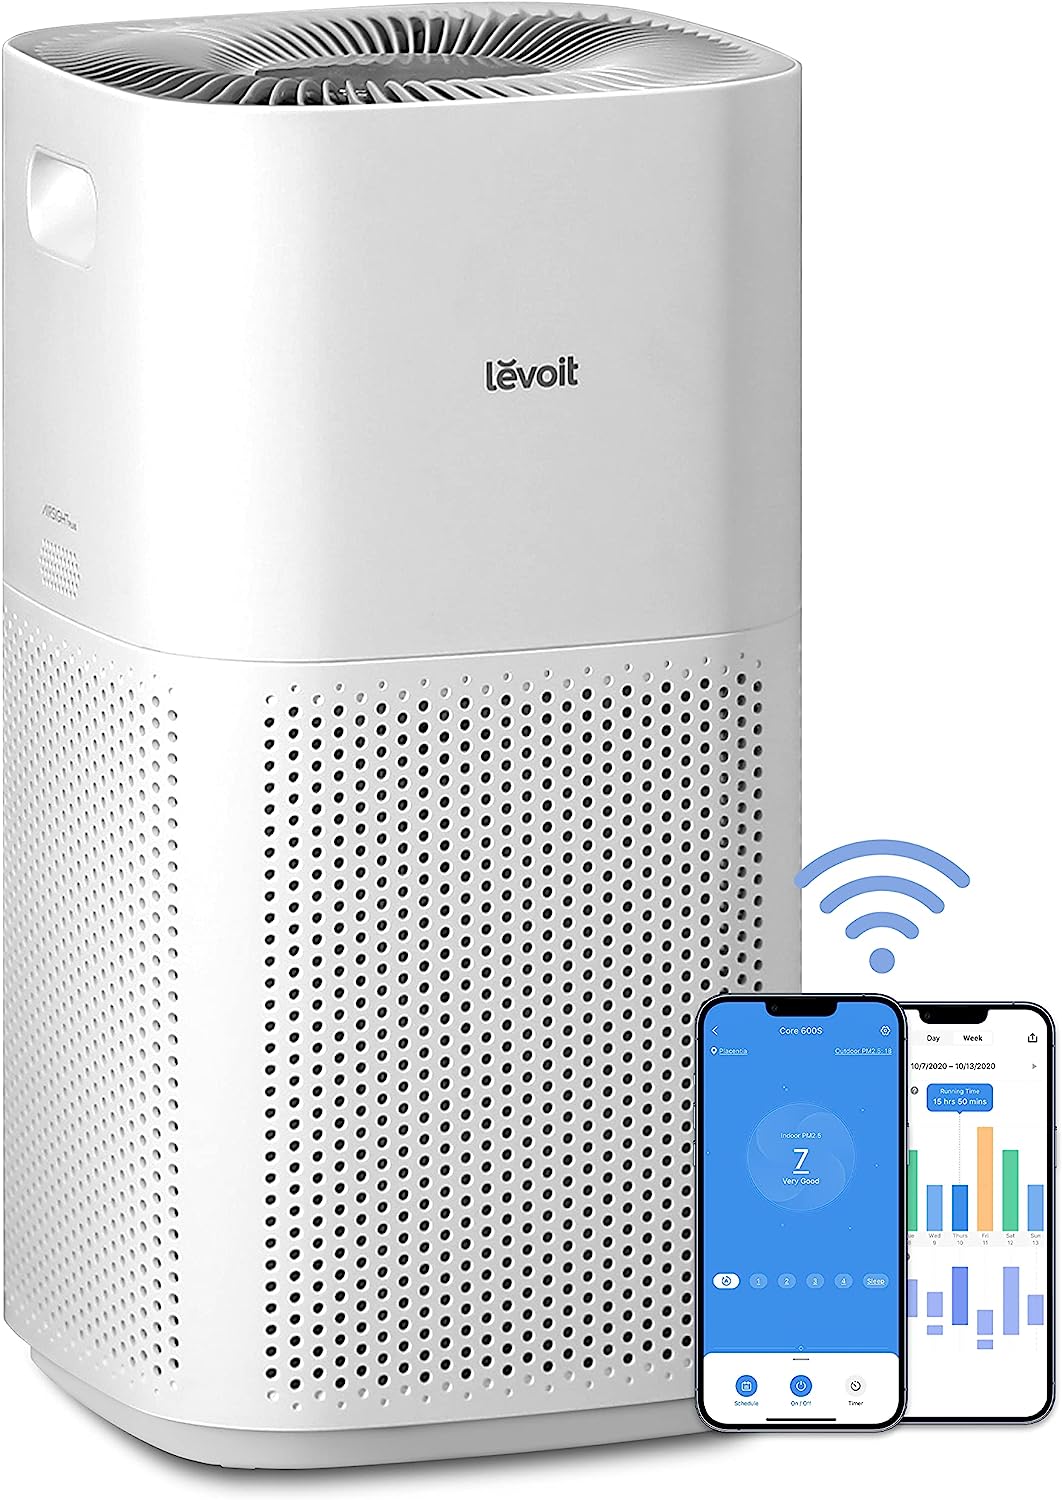 Levoit Air Purifier for Home Large Room with H13 True HEPA Filter for Allergies